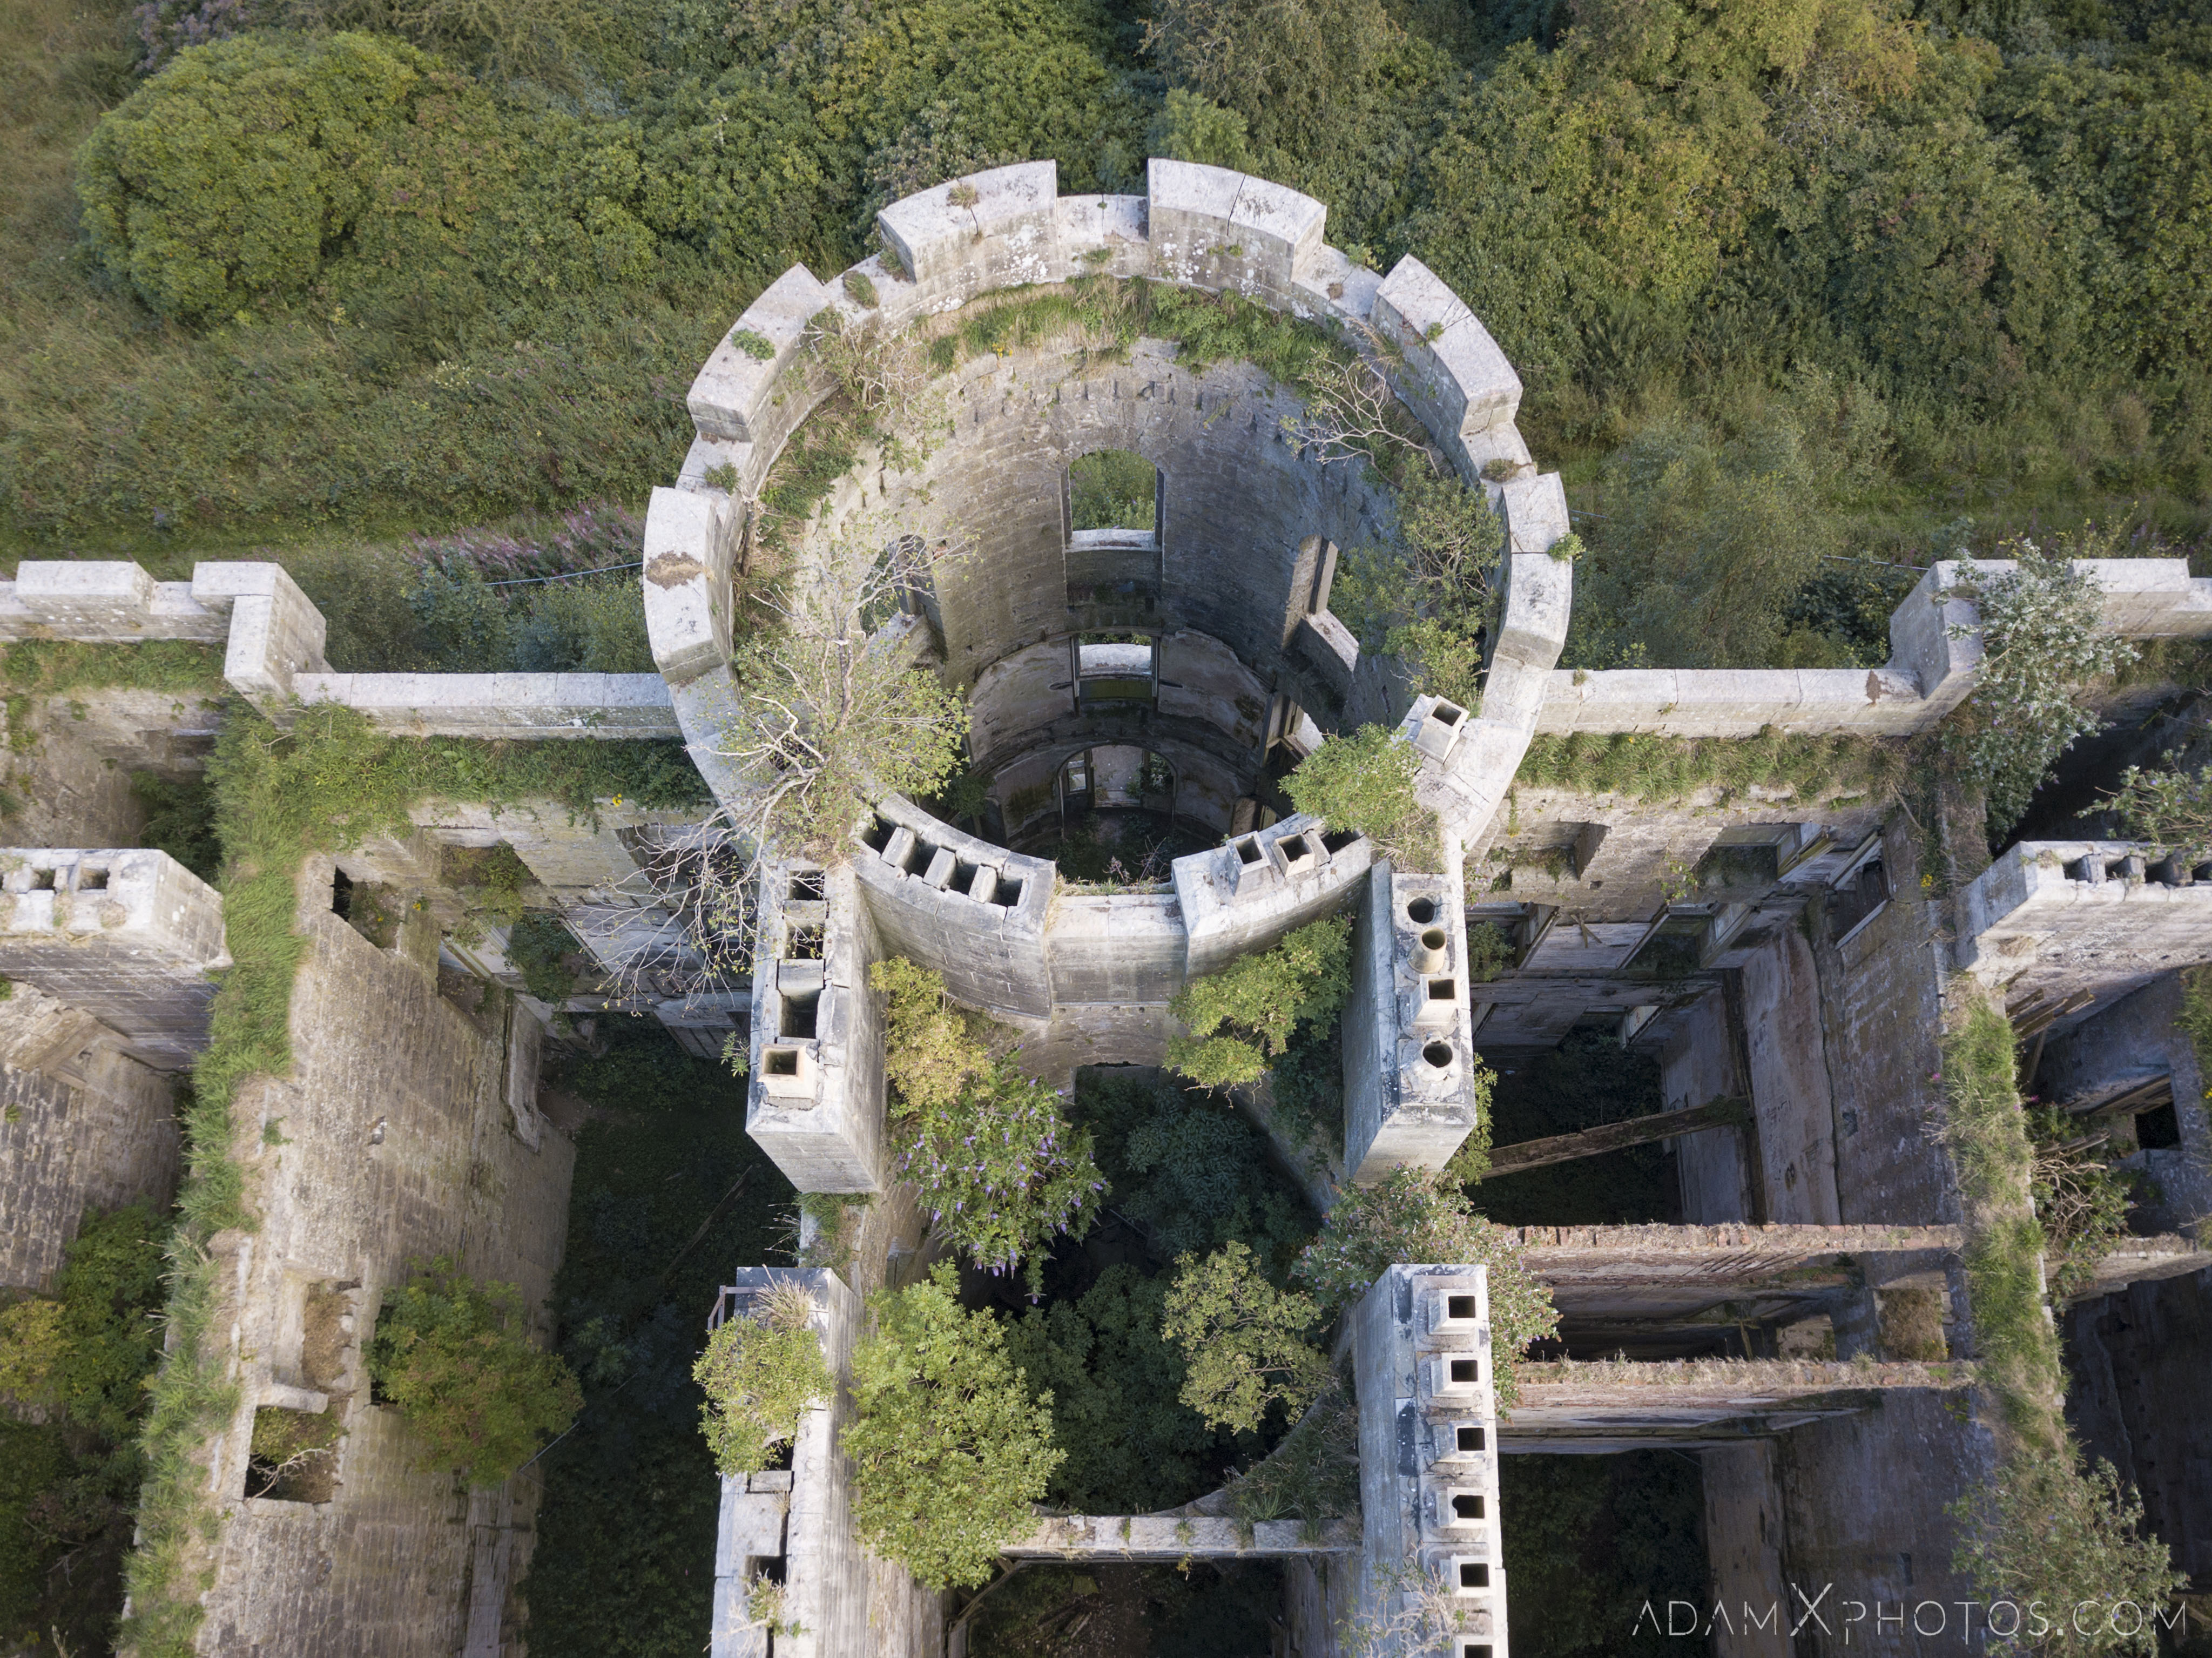 Turret overgrown rotting Drone Mavic from above aerial view Dalquharran Castle Ayrshire Scotland Adam X Urbex Urban Exploration Access 2018 Abandoned decay ruins lost forgotten derelict location creepy haunting eerie